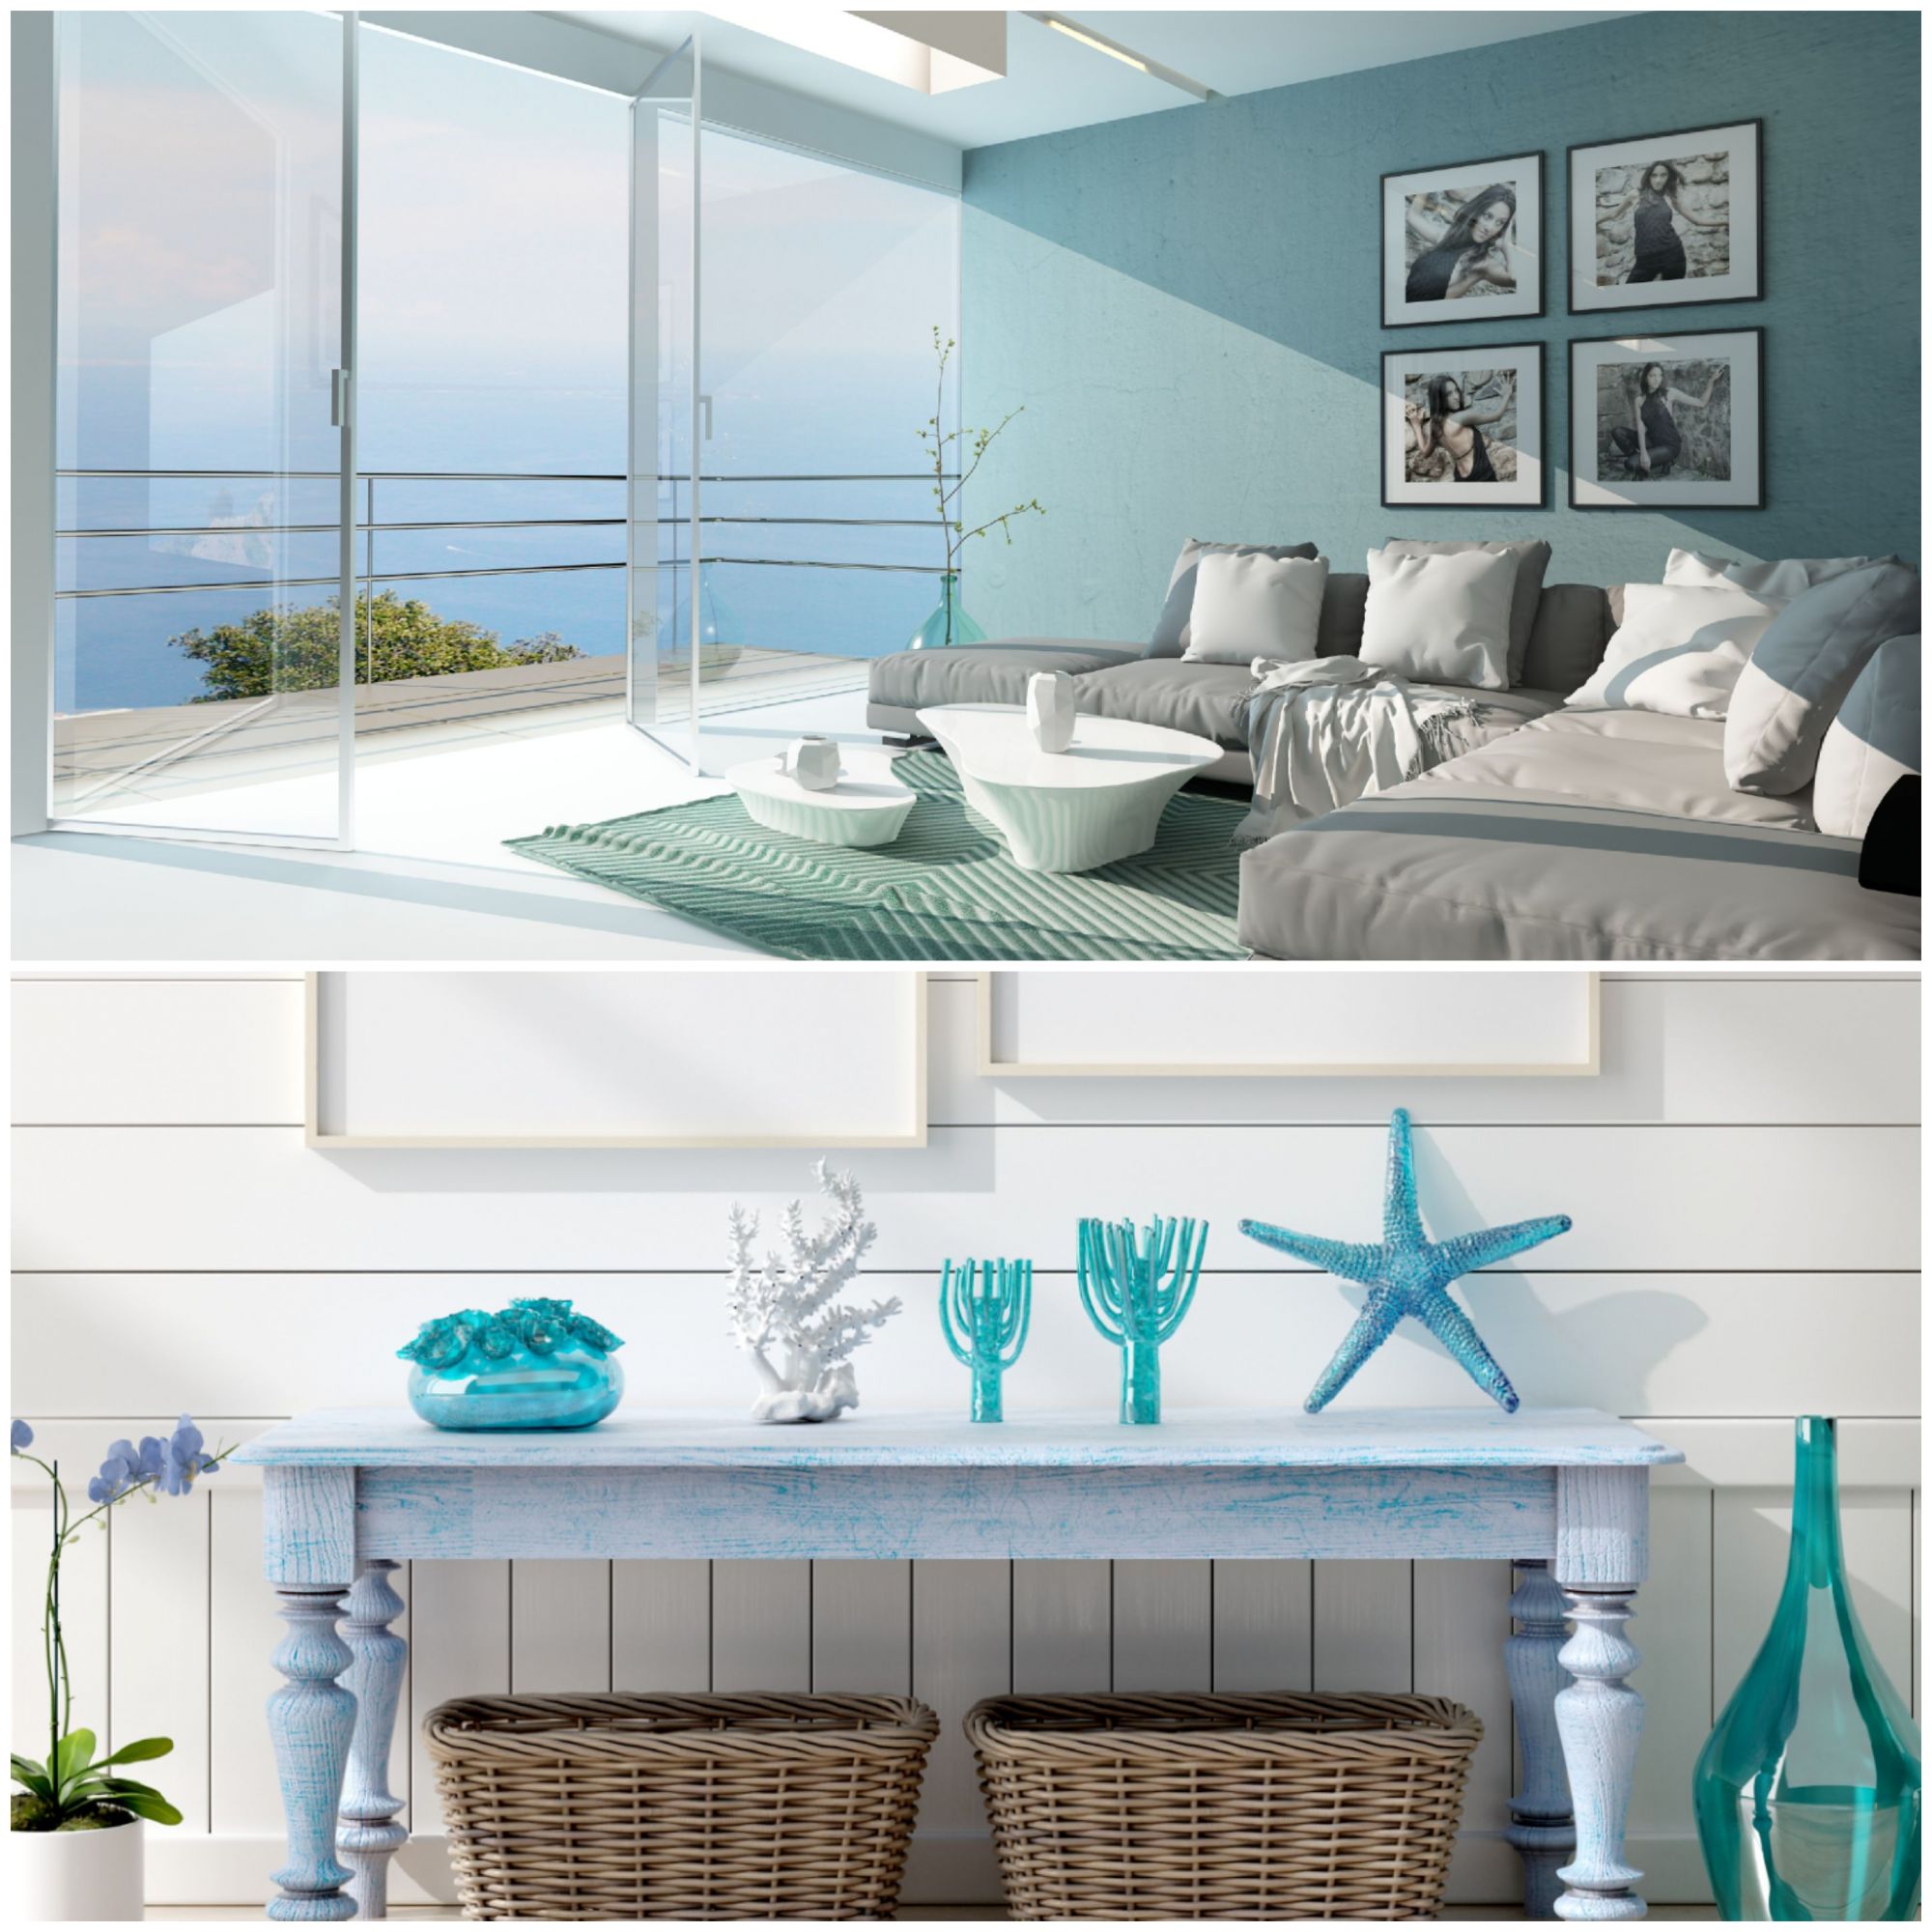 Collage of home decor and interior design featuring ocean tones, compiled by PH Design, home builders specializing in custom home design and construction in Canton, Ohio